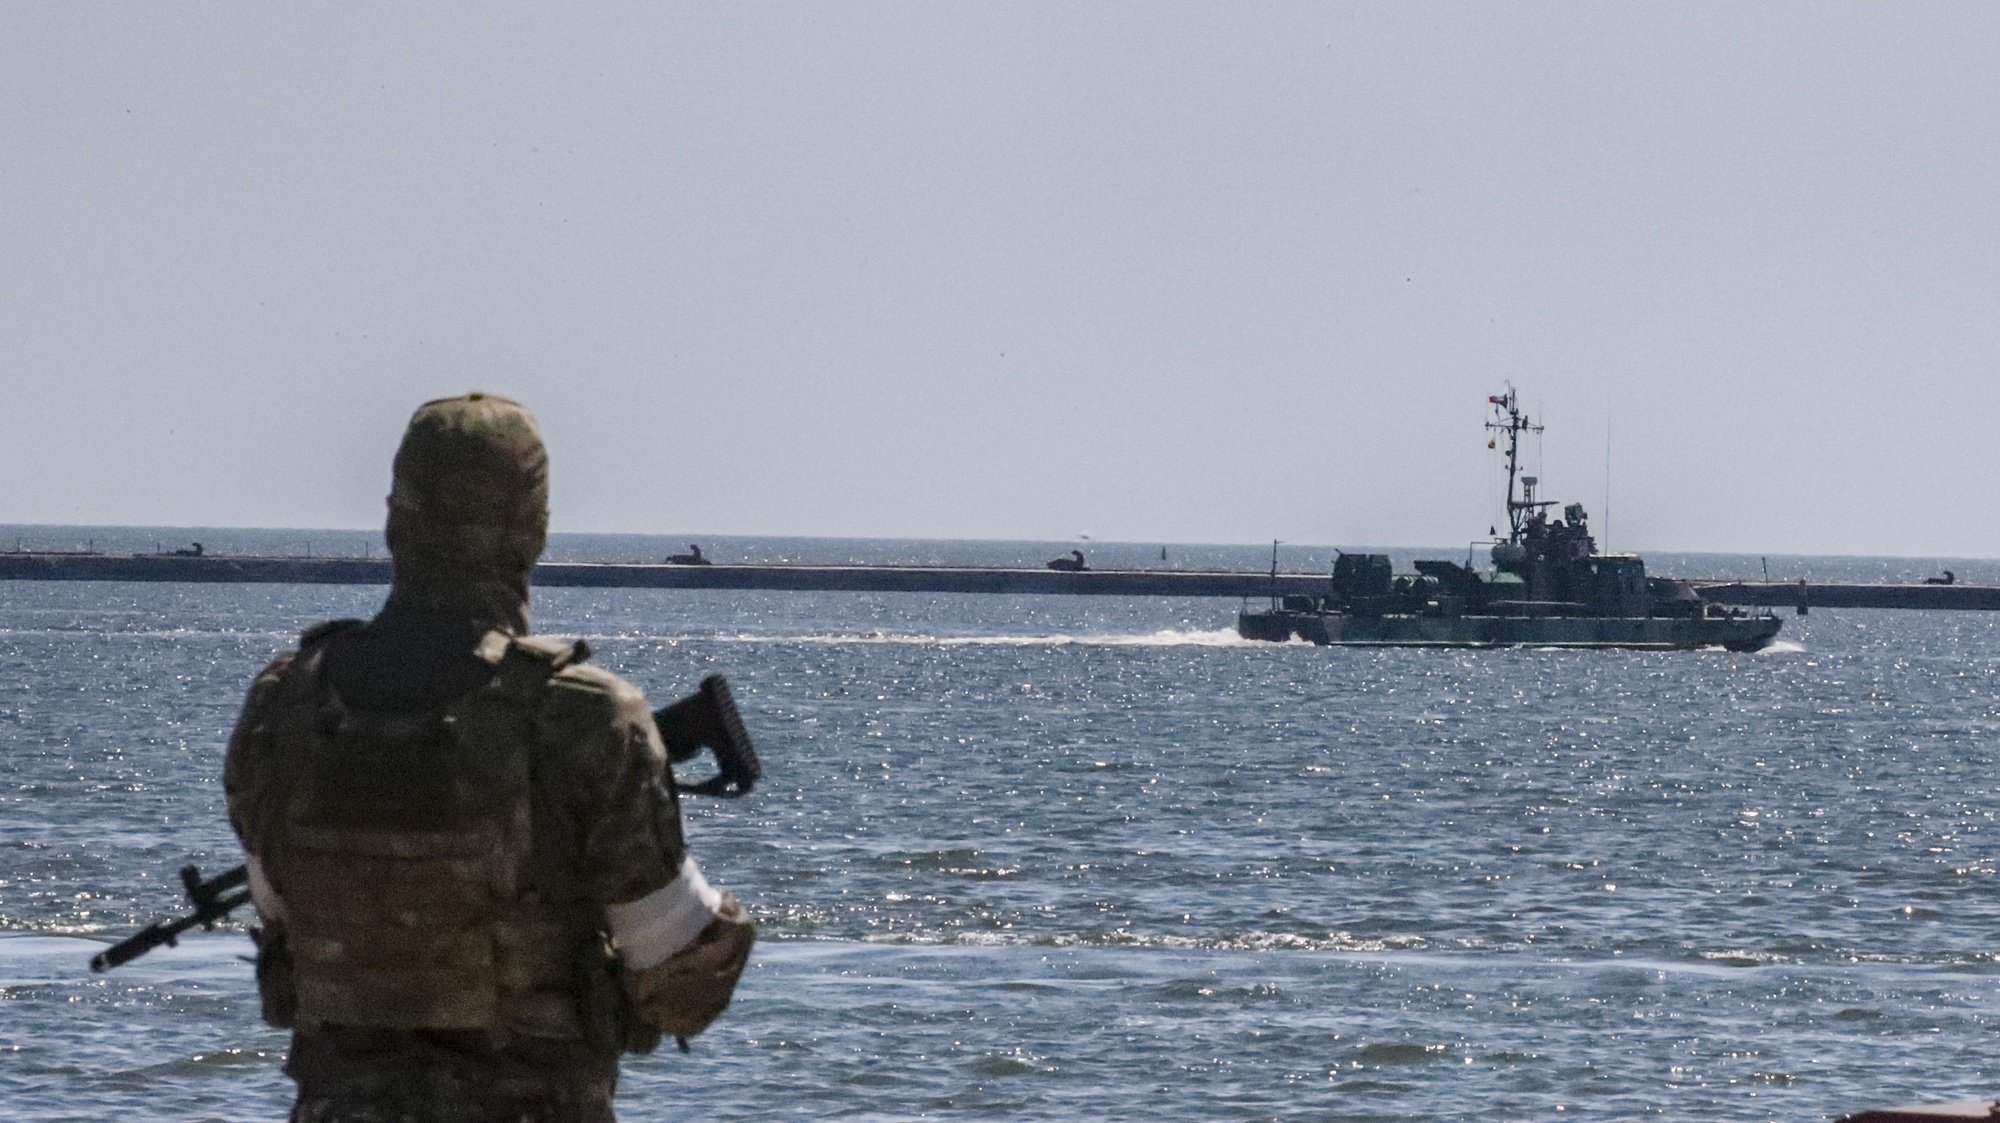 epa10009896 A picture taken during a visit to Mariupol organized by the Russian military shows a Russian navy ship sails in the waters of the cargo sea port of Mariupol, Ukraine, 12 June 2022.  Russian Defense Minister Sergei Shoigu said the seaports of Mariupol and Berdyansk in Ukraine are operating normally and are ready to ship grain.  According to Shoigu, demining of the Mariupol seaport has been completed and it is functioning normally and has received the first cargo ships. Shoigu added ‘In Mariupol, water and electricity supply to residential areas are gradually being restored, streets are being cleared, the first social facilities have begun to function.’ On 24 February Russian troops entered Ukrainian territory starting a conflict that has provoked destruction and a humanitarian crisis. According to the UNHCR, more than six million refugees have fled Ukraine, and a further 7.7 million people have been displaced internally within Ukraine since.  EPA/SERGEI ILNITSKY